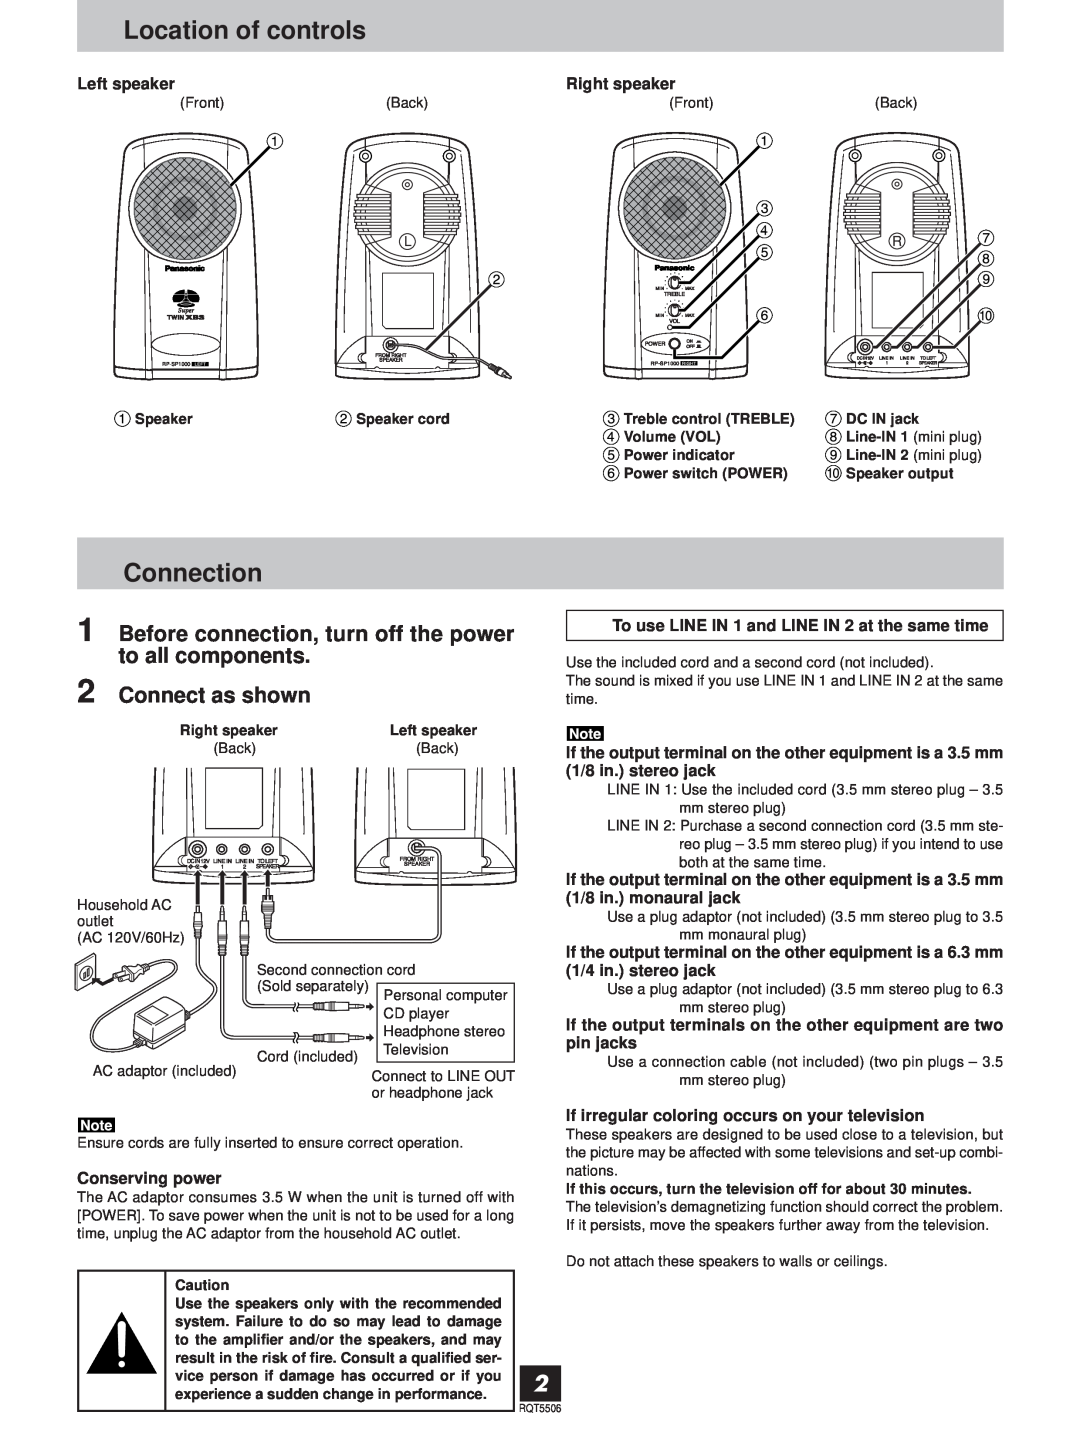 Panasonic RP-SP1000 operating instructions Location of controls, Connection, Connect as shown 